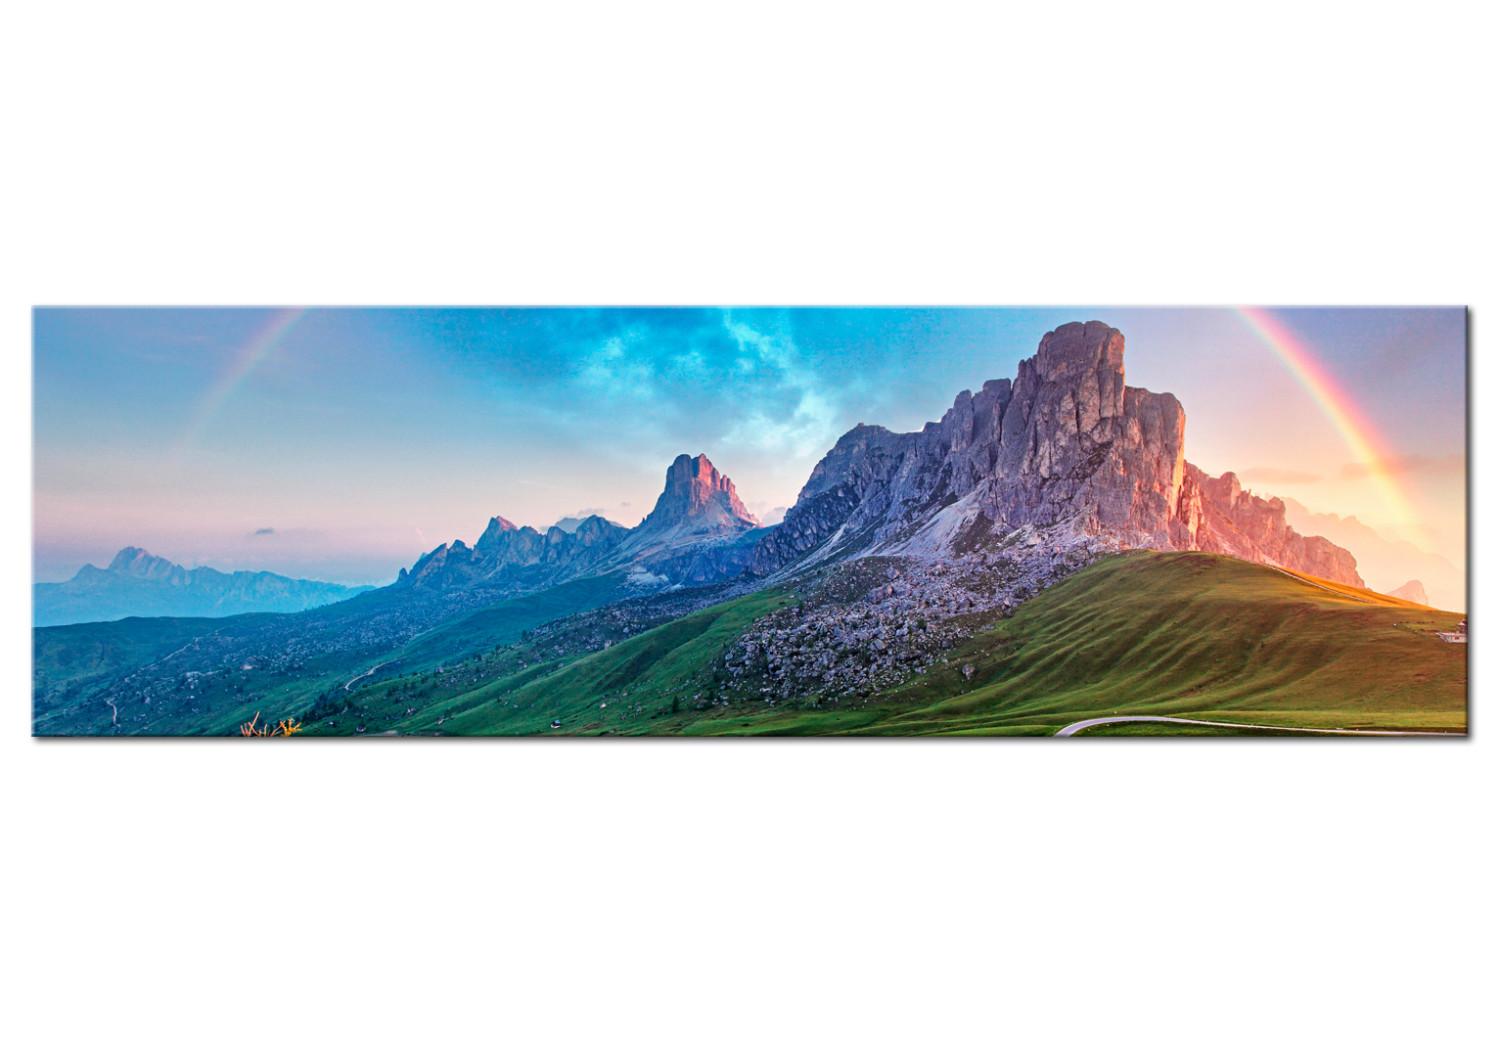 Canvas Summer in the Alps (1-piece) - Rainbow and Sky over Mountain Landscape